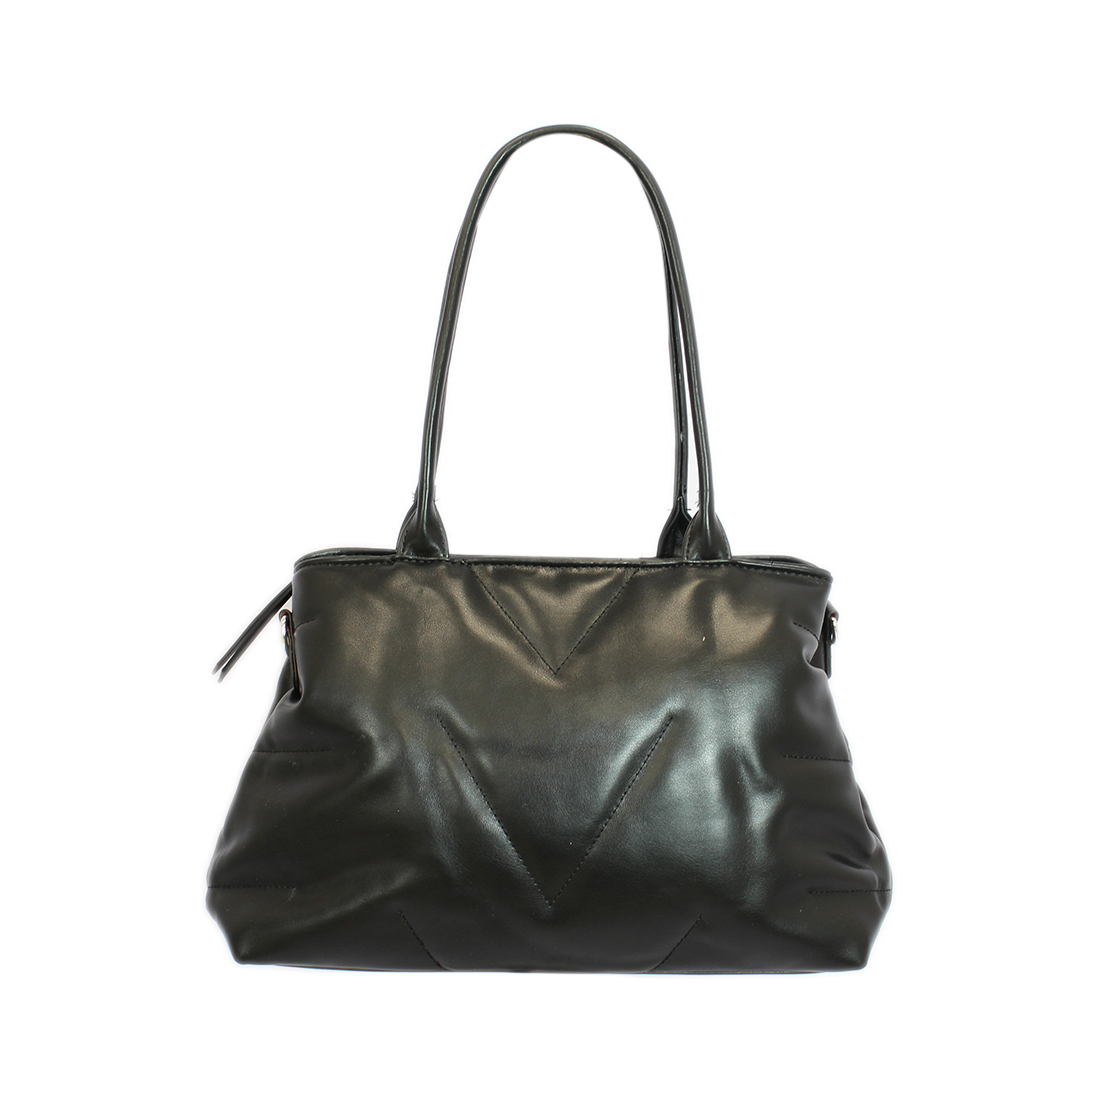 Medium with leather material